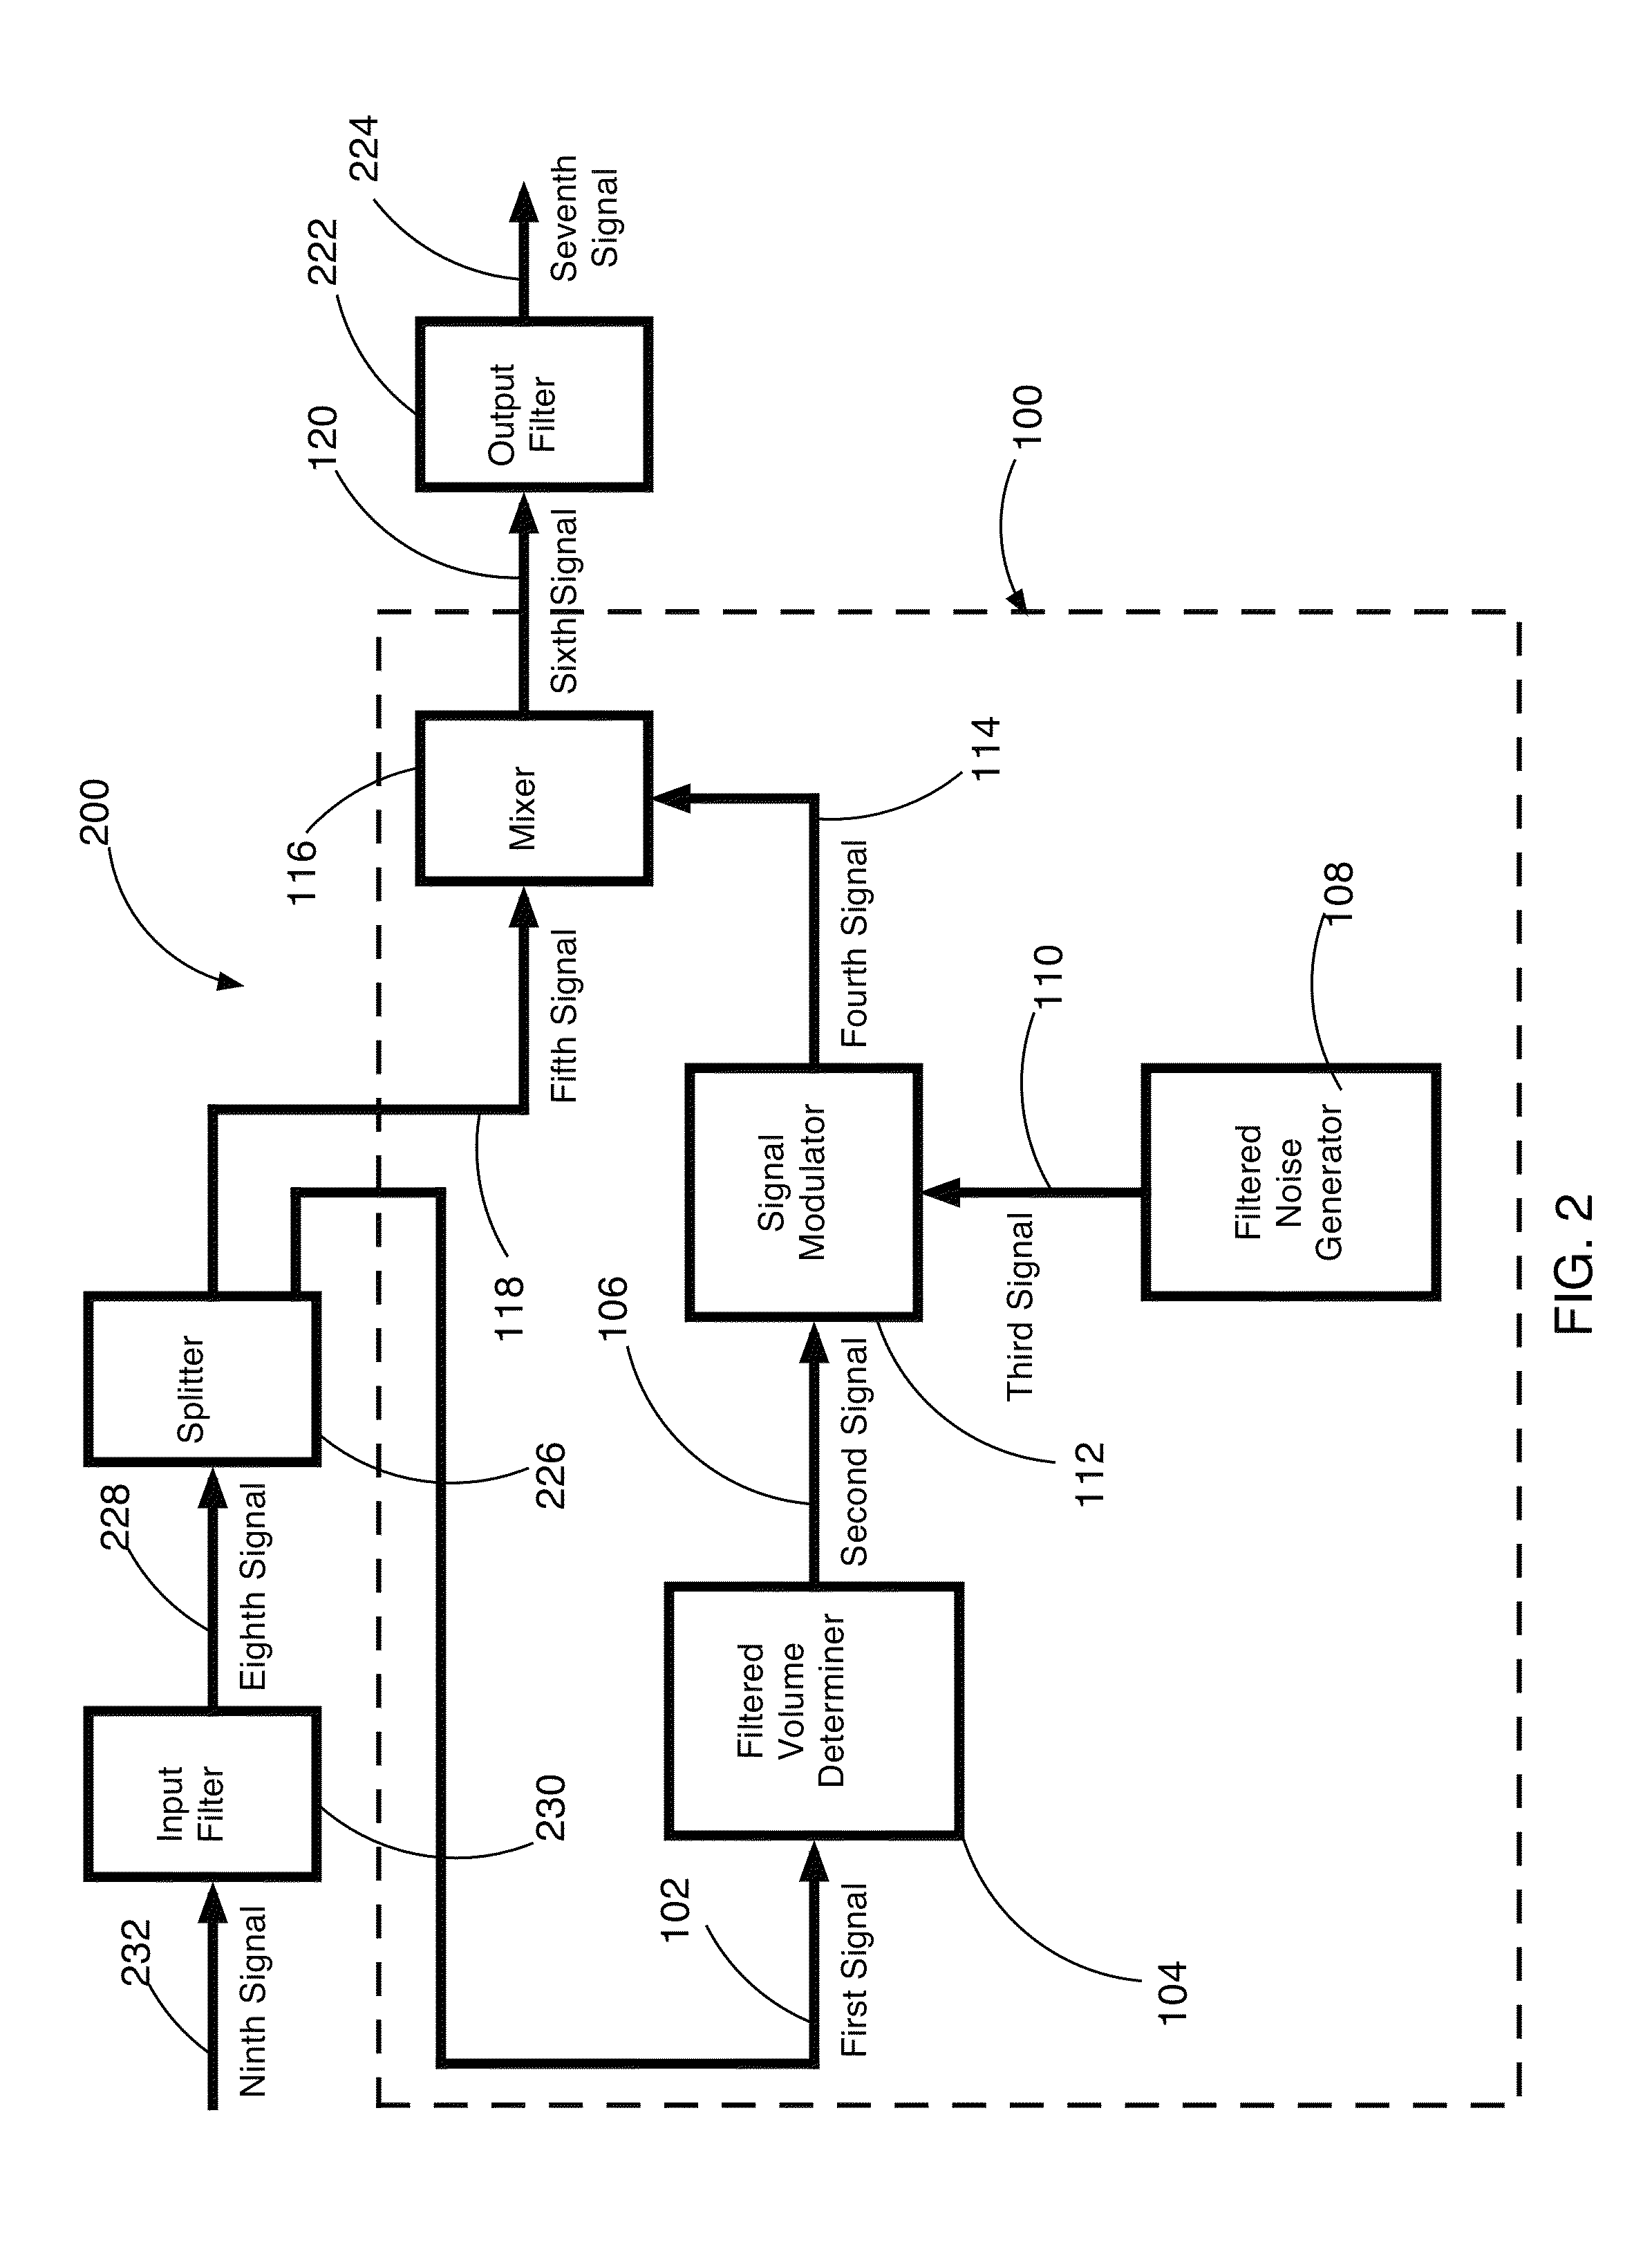 Method and apparatus for adding audible noise with time varying volume to audio devices